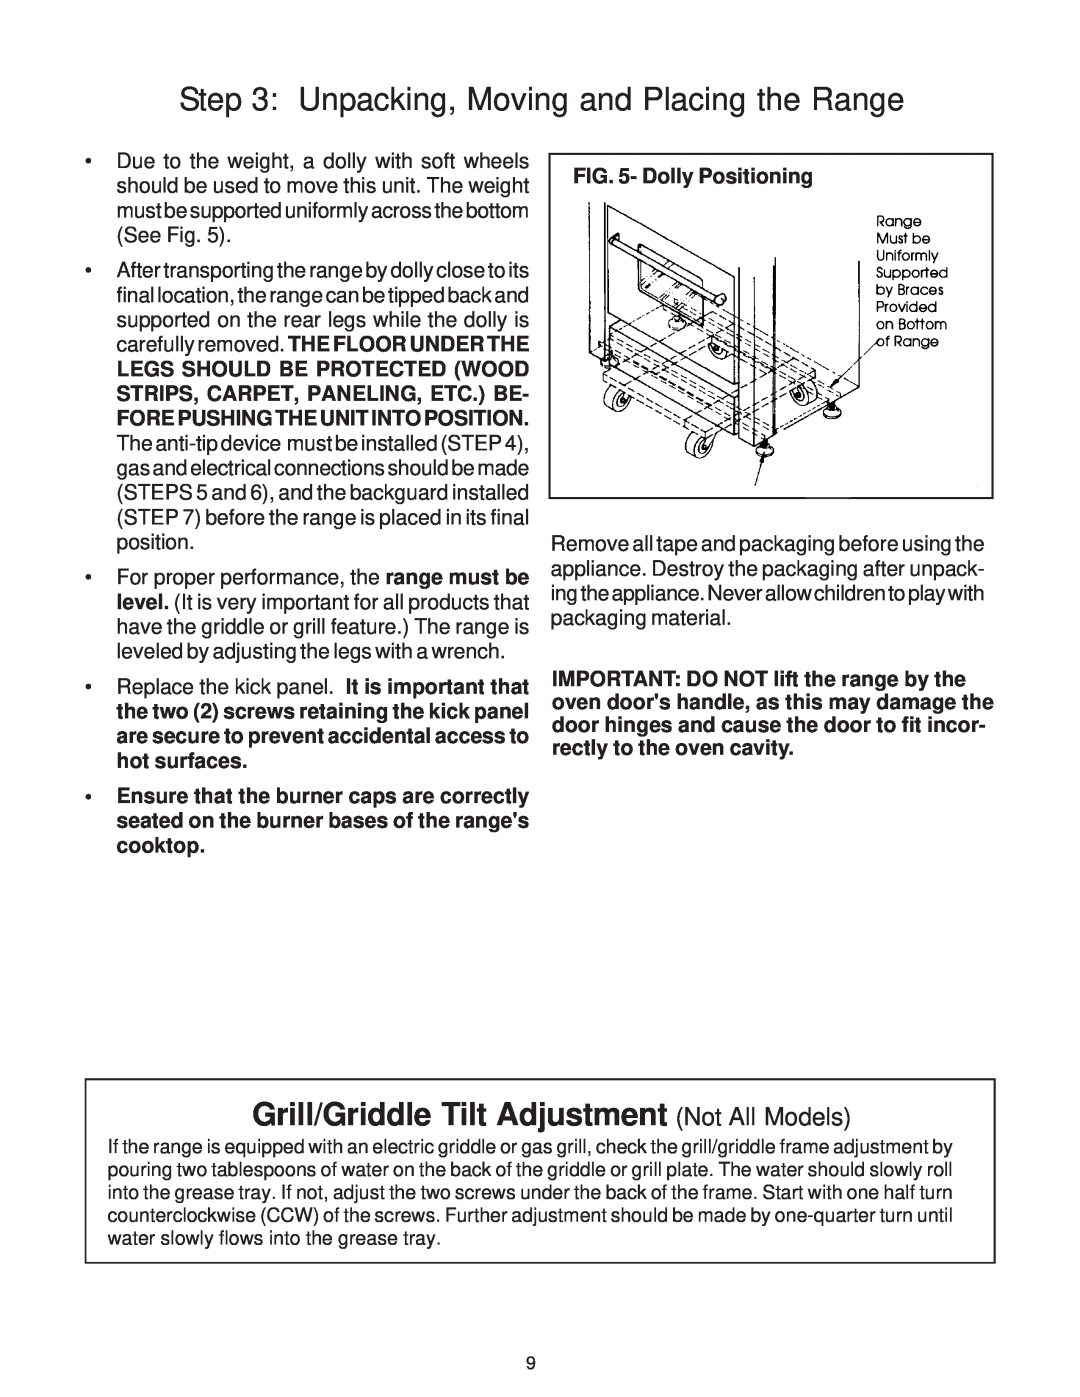 Thermador 336 Grill/Griddle Tilt Adjustment Not All Models, Unpacking, Moving and Placing the Range, Dolly Positioning 